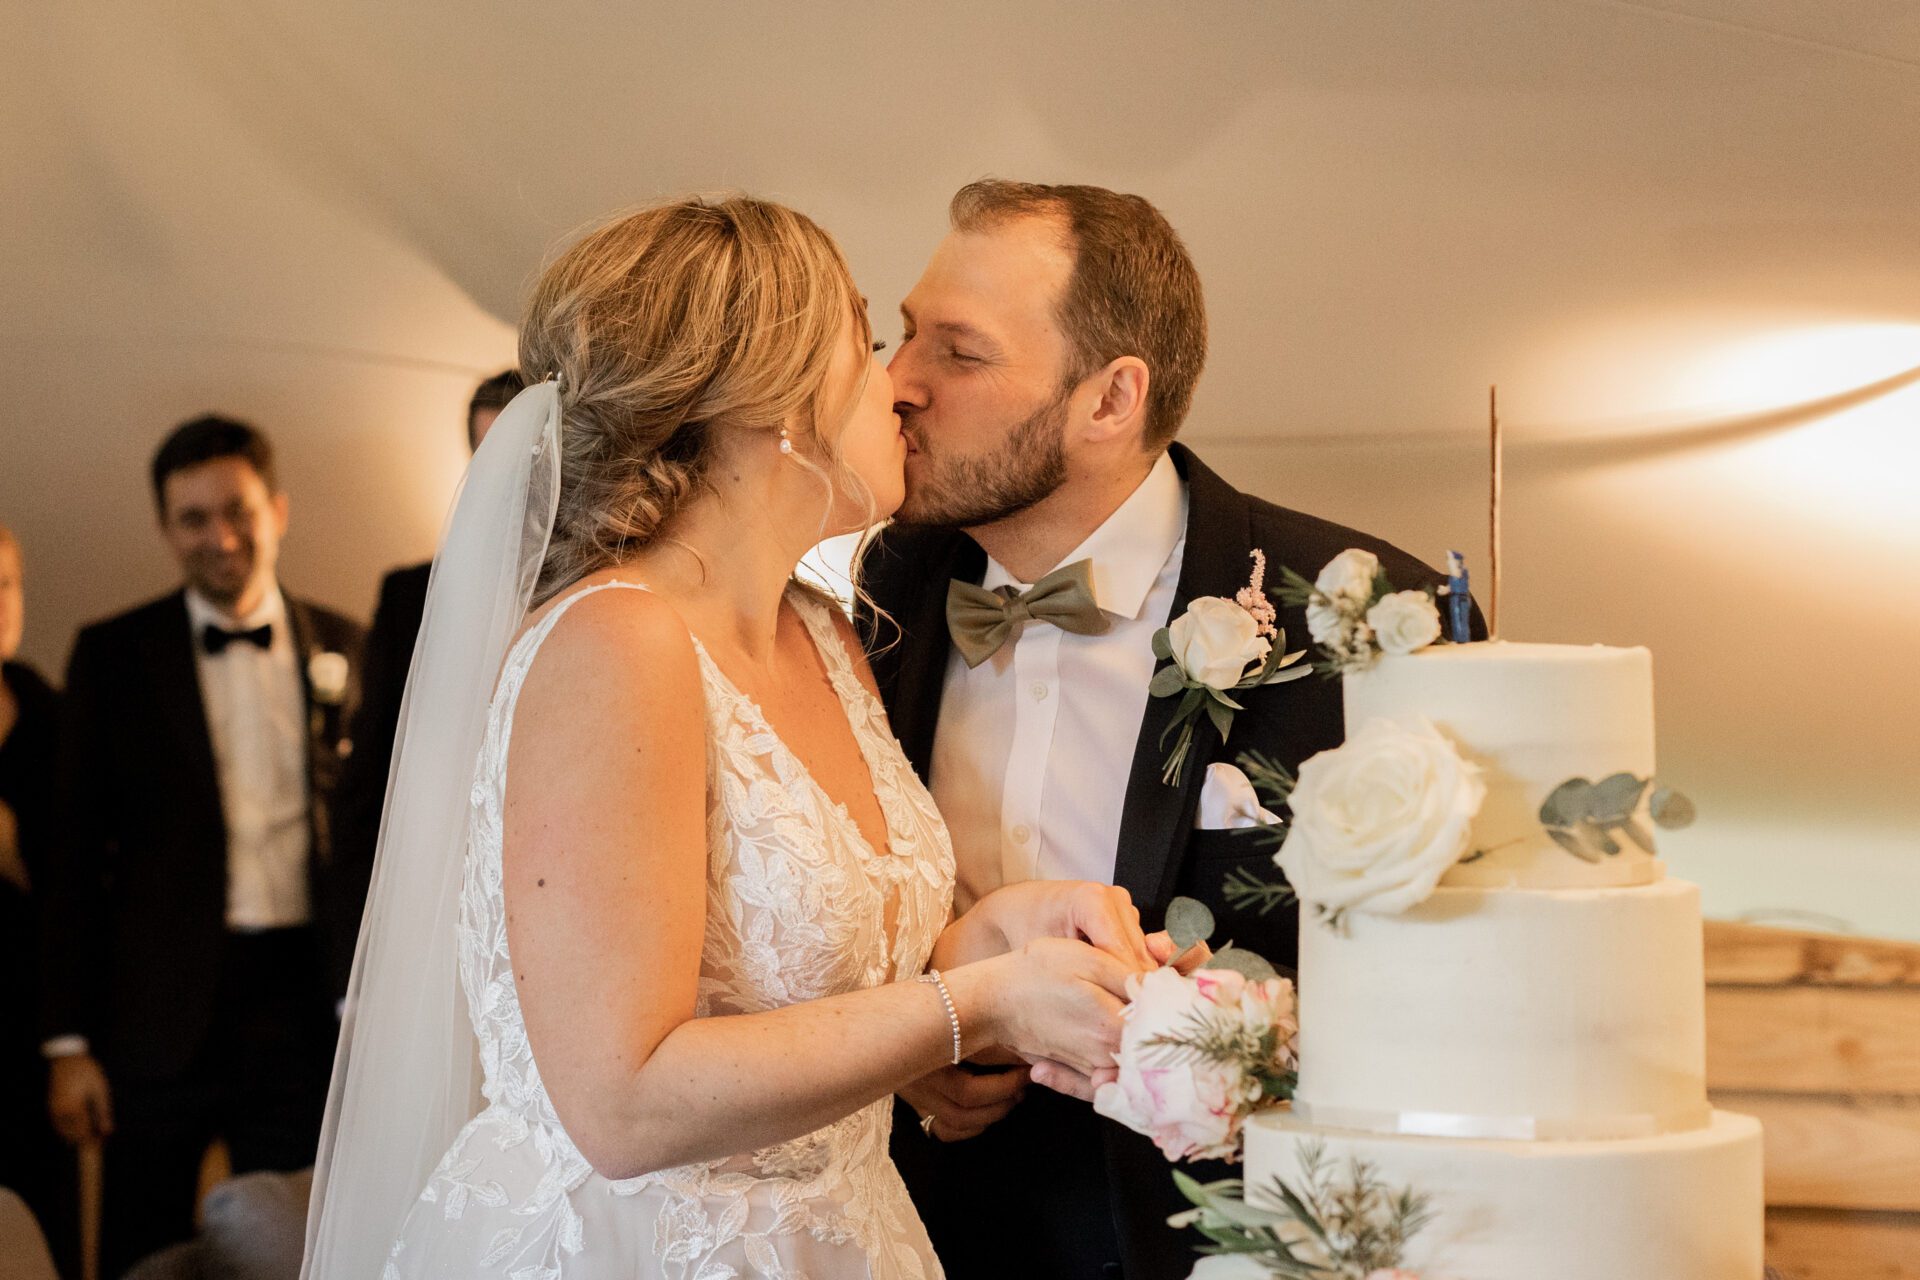 The bride and groom share a kiss as they cut the cake at Old Luxters Barn wedding venue in Oxfordshire